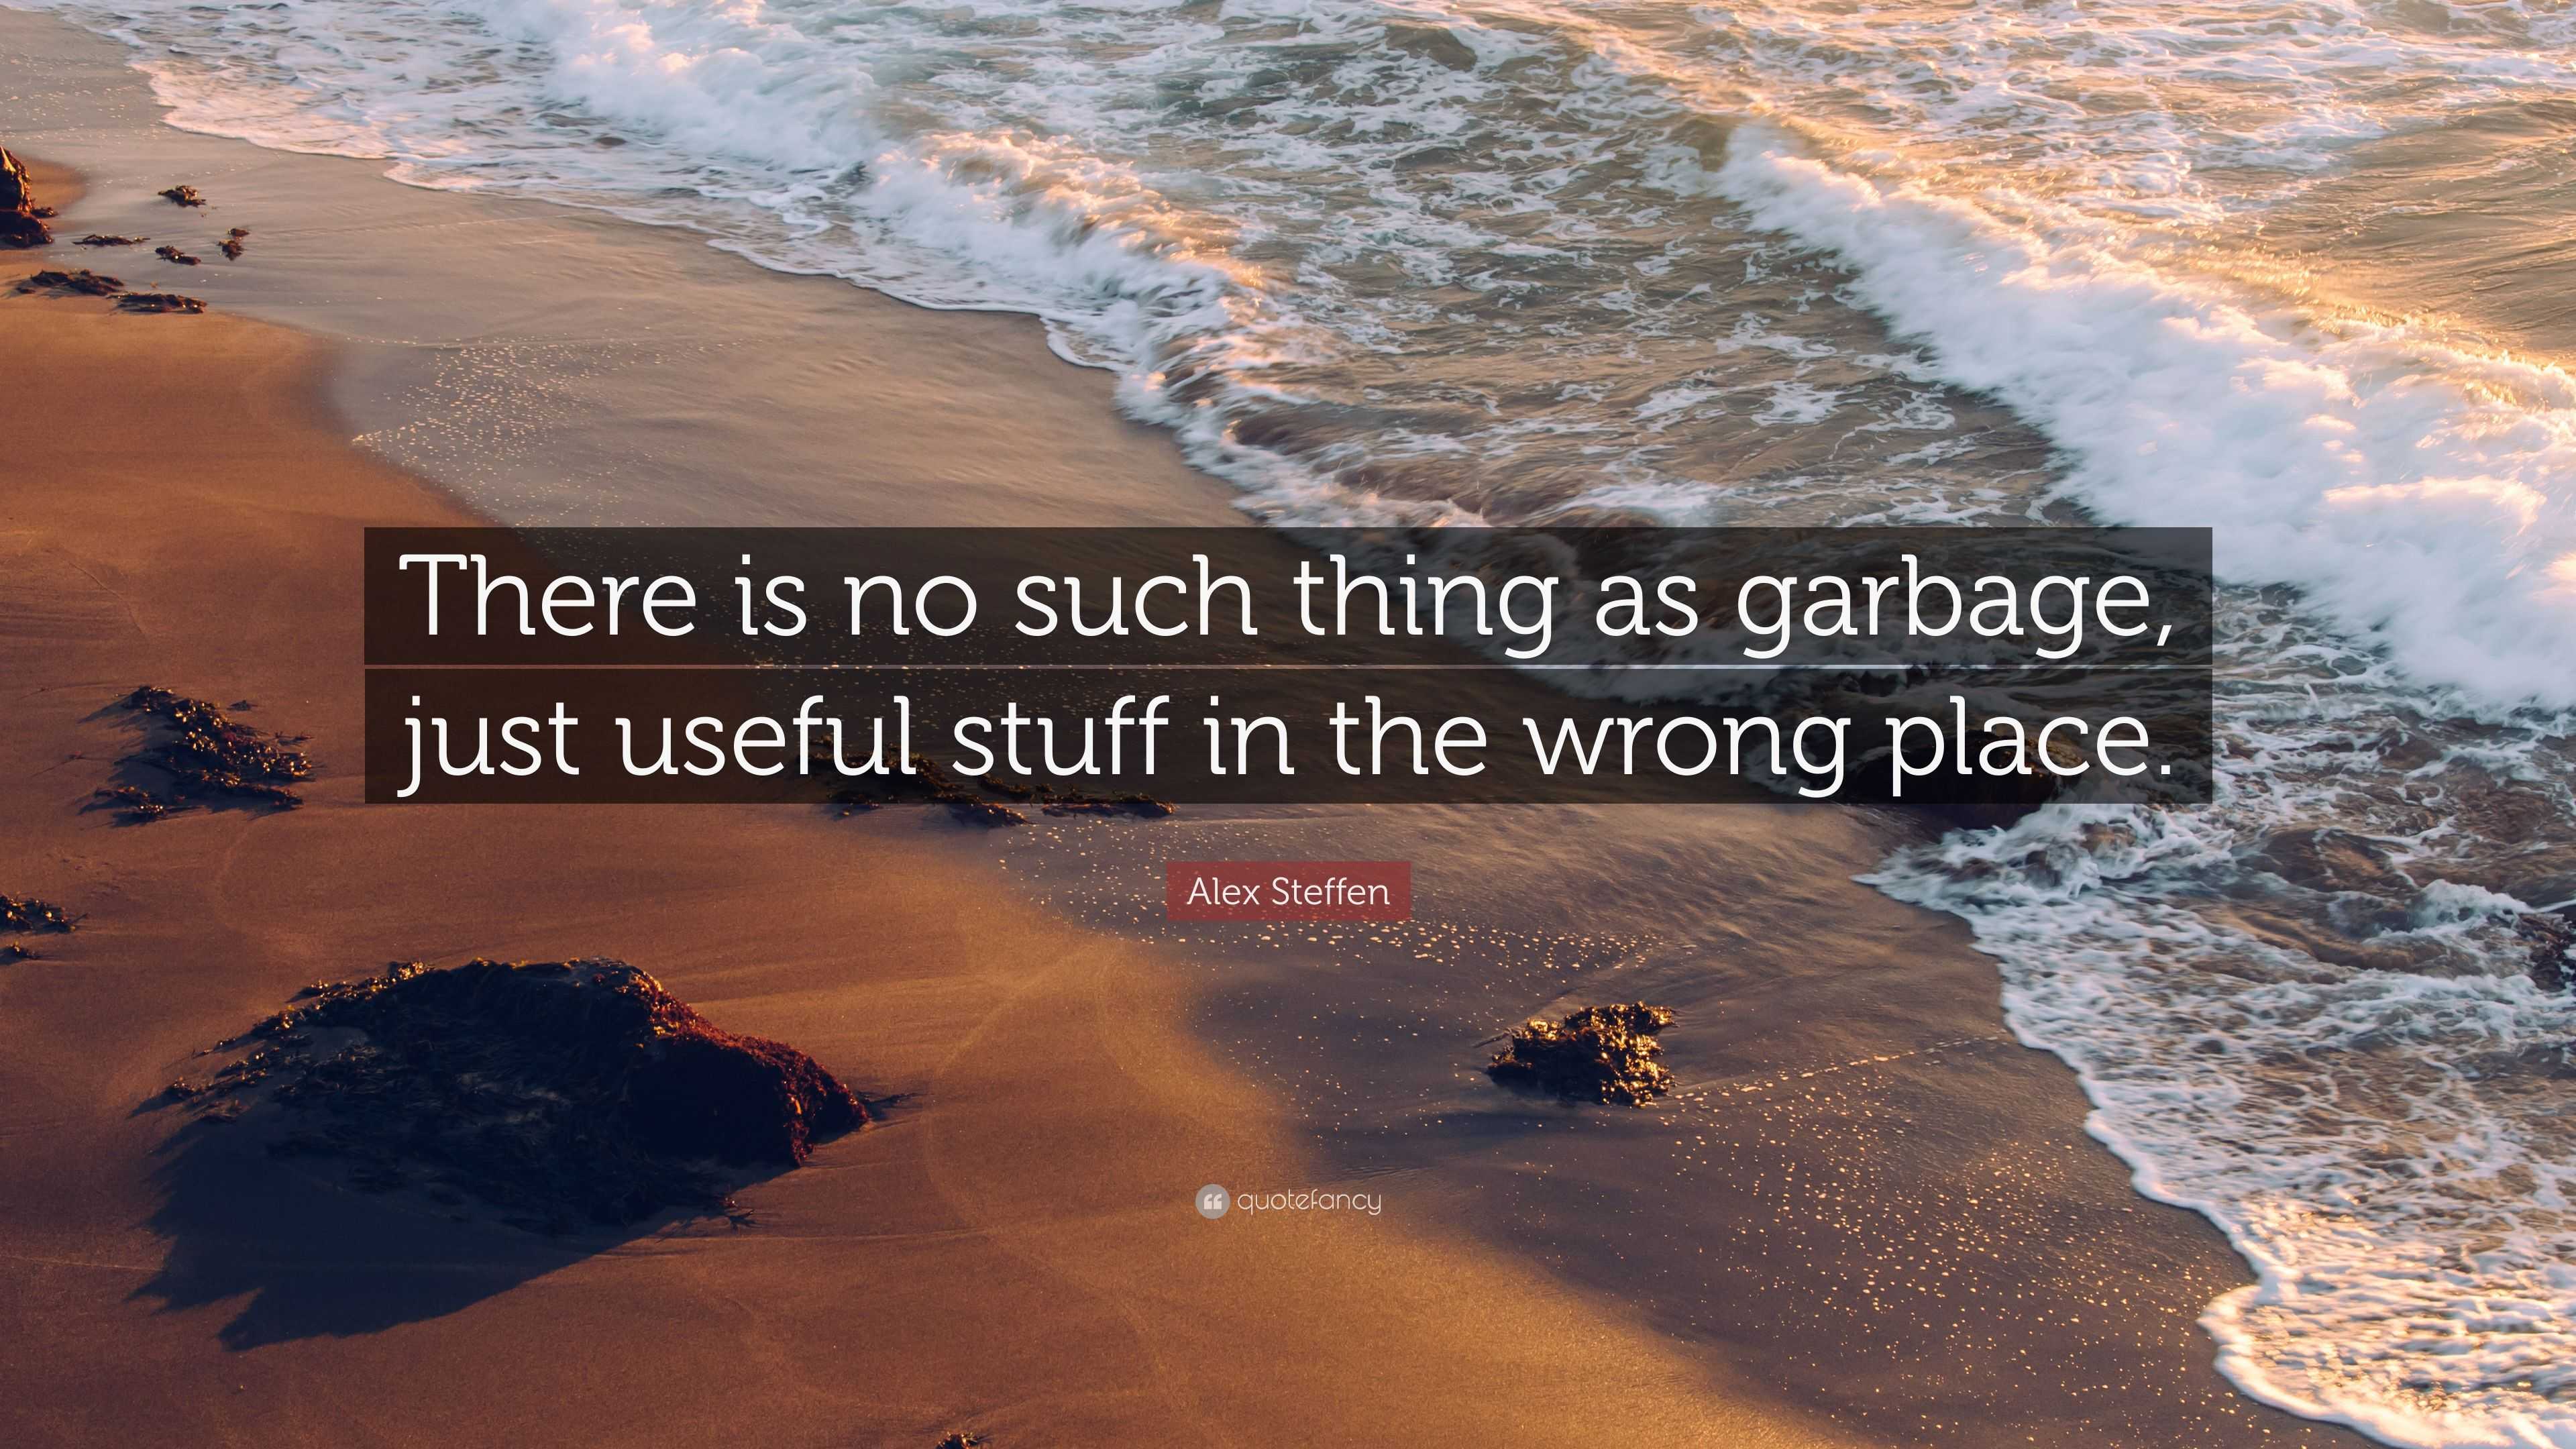 https://quotefancy.com/media/wallpaper/3840x2160/5243892-Alex-Steffen-Quote-There-is-no-such-thing-as-garbage-just-useful.jpg